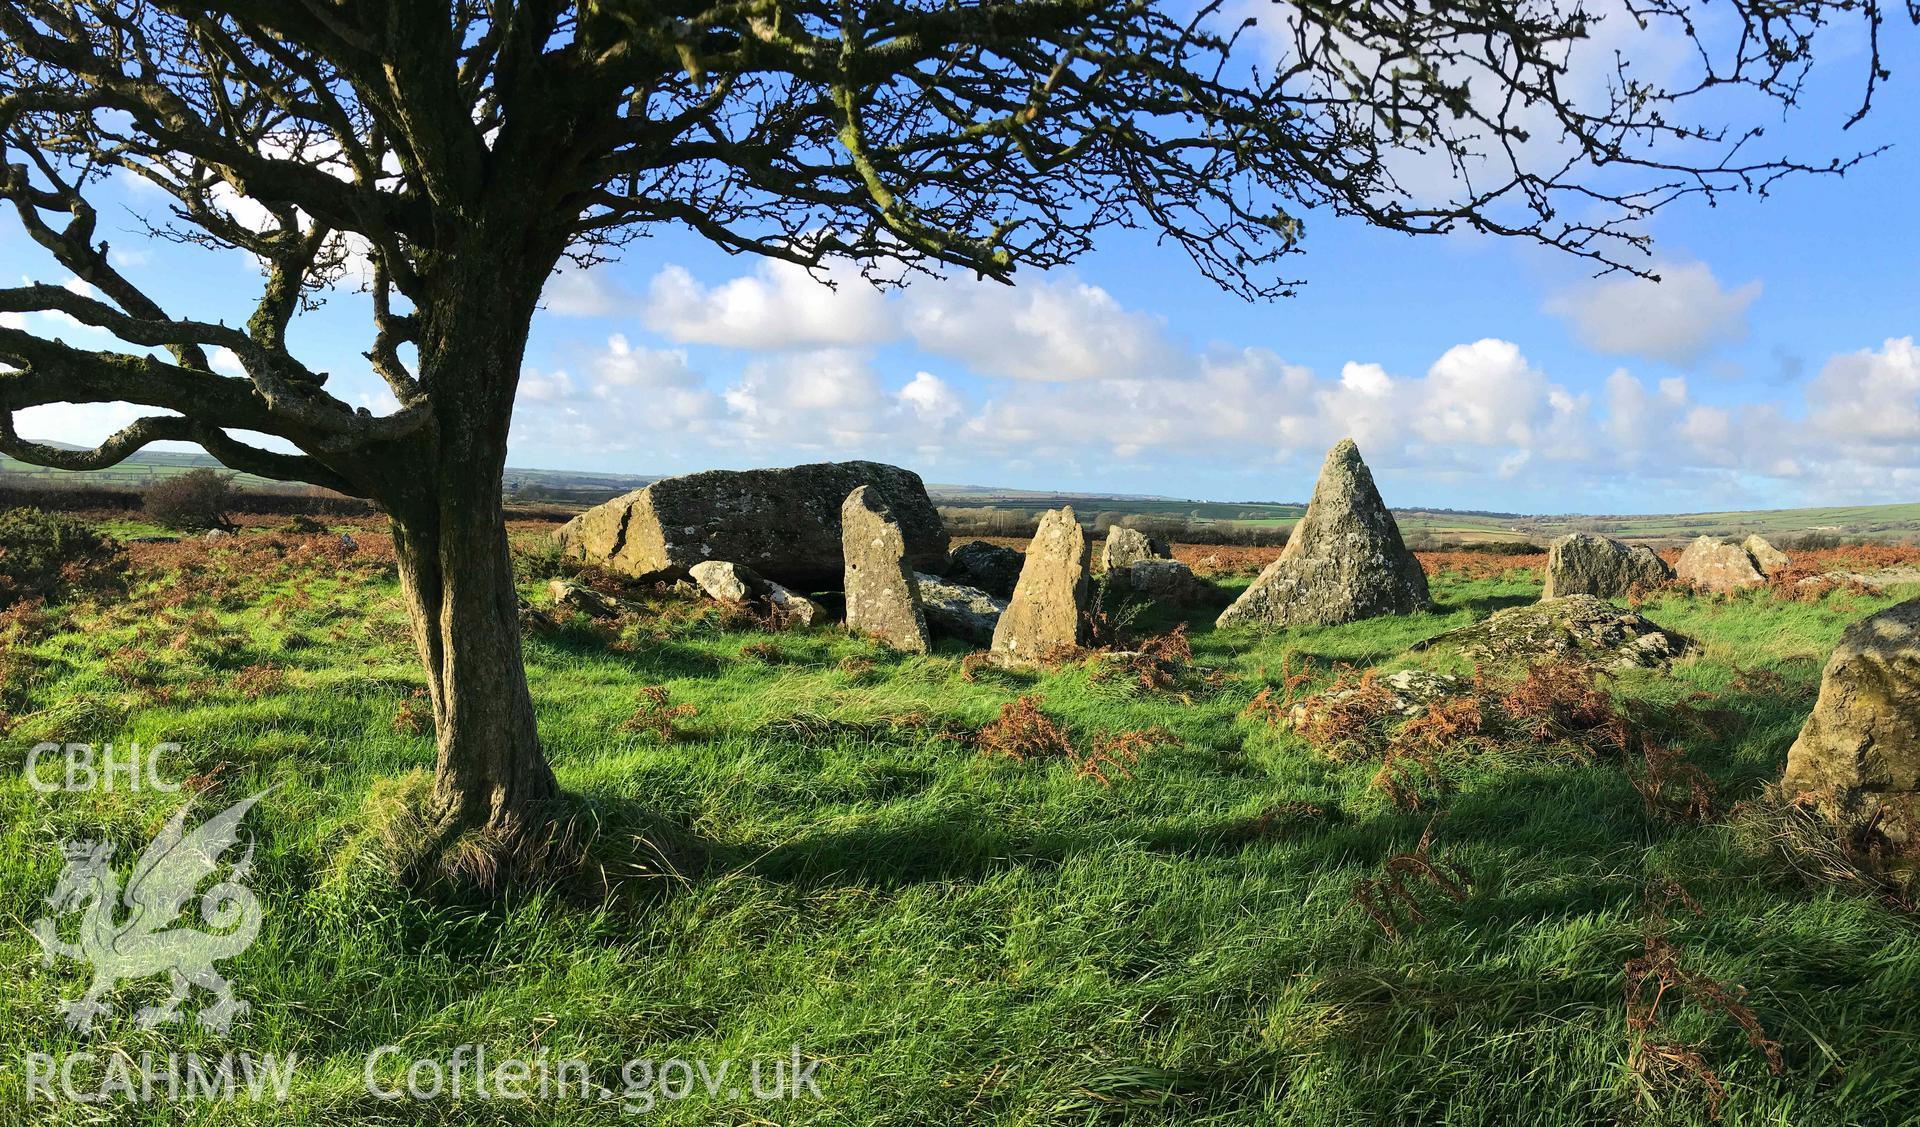 Digital photograph showing general view of Carn Turne chambered tomb, produced by Paul Davis in 2020